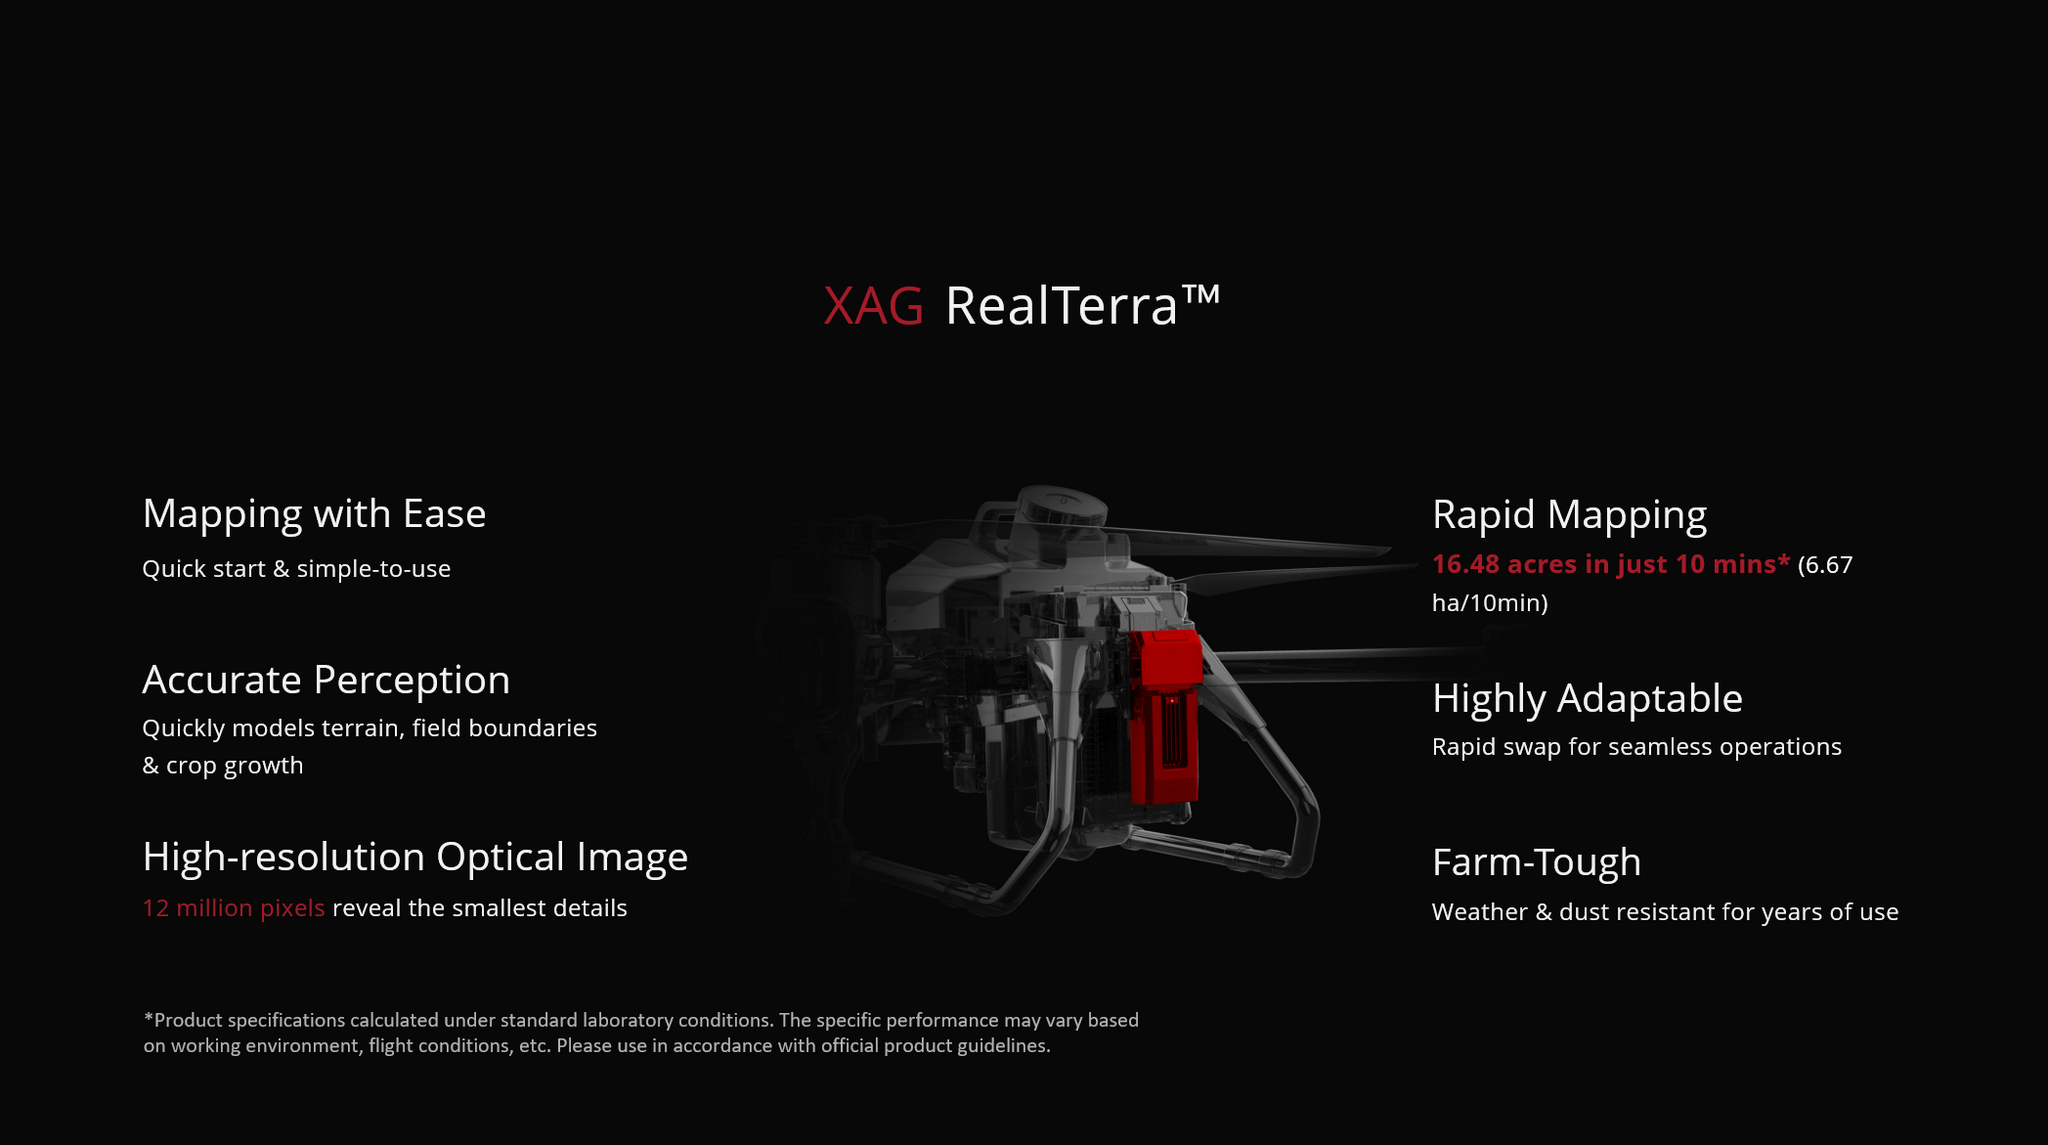 XAG P40 20L Agriculture Drone, XAG RealTerraTM Mapping with Ease Rapid Mapping Quick start